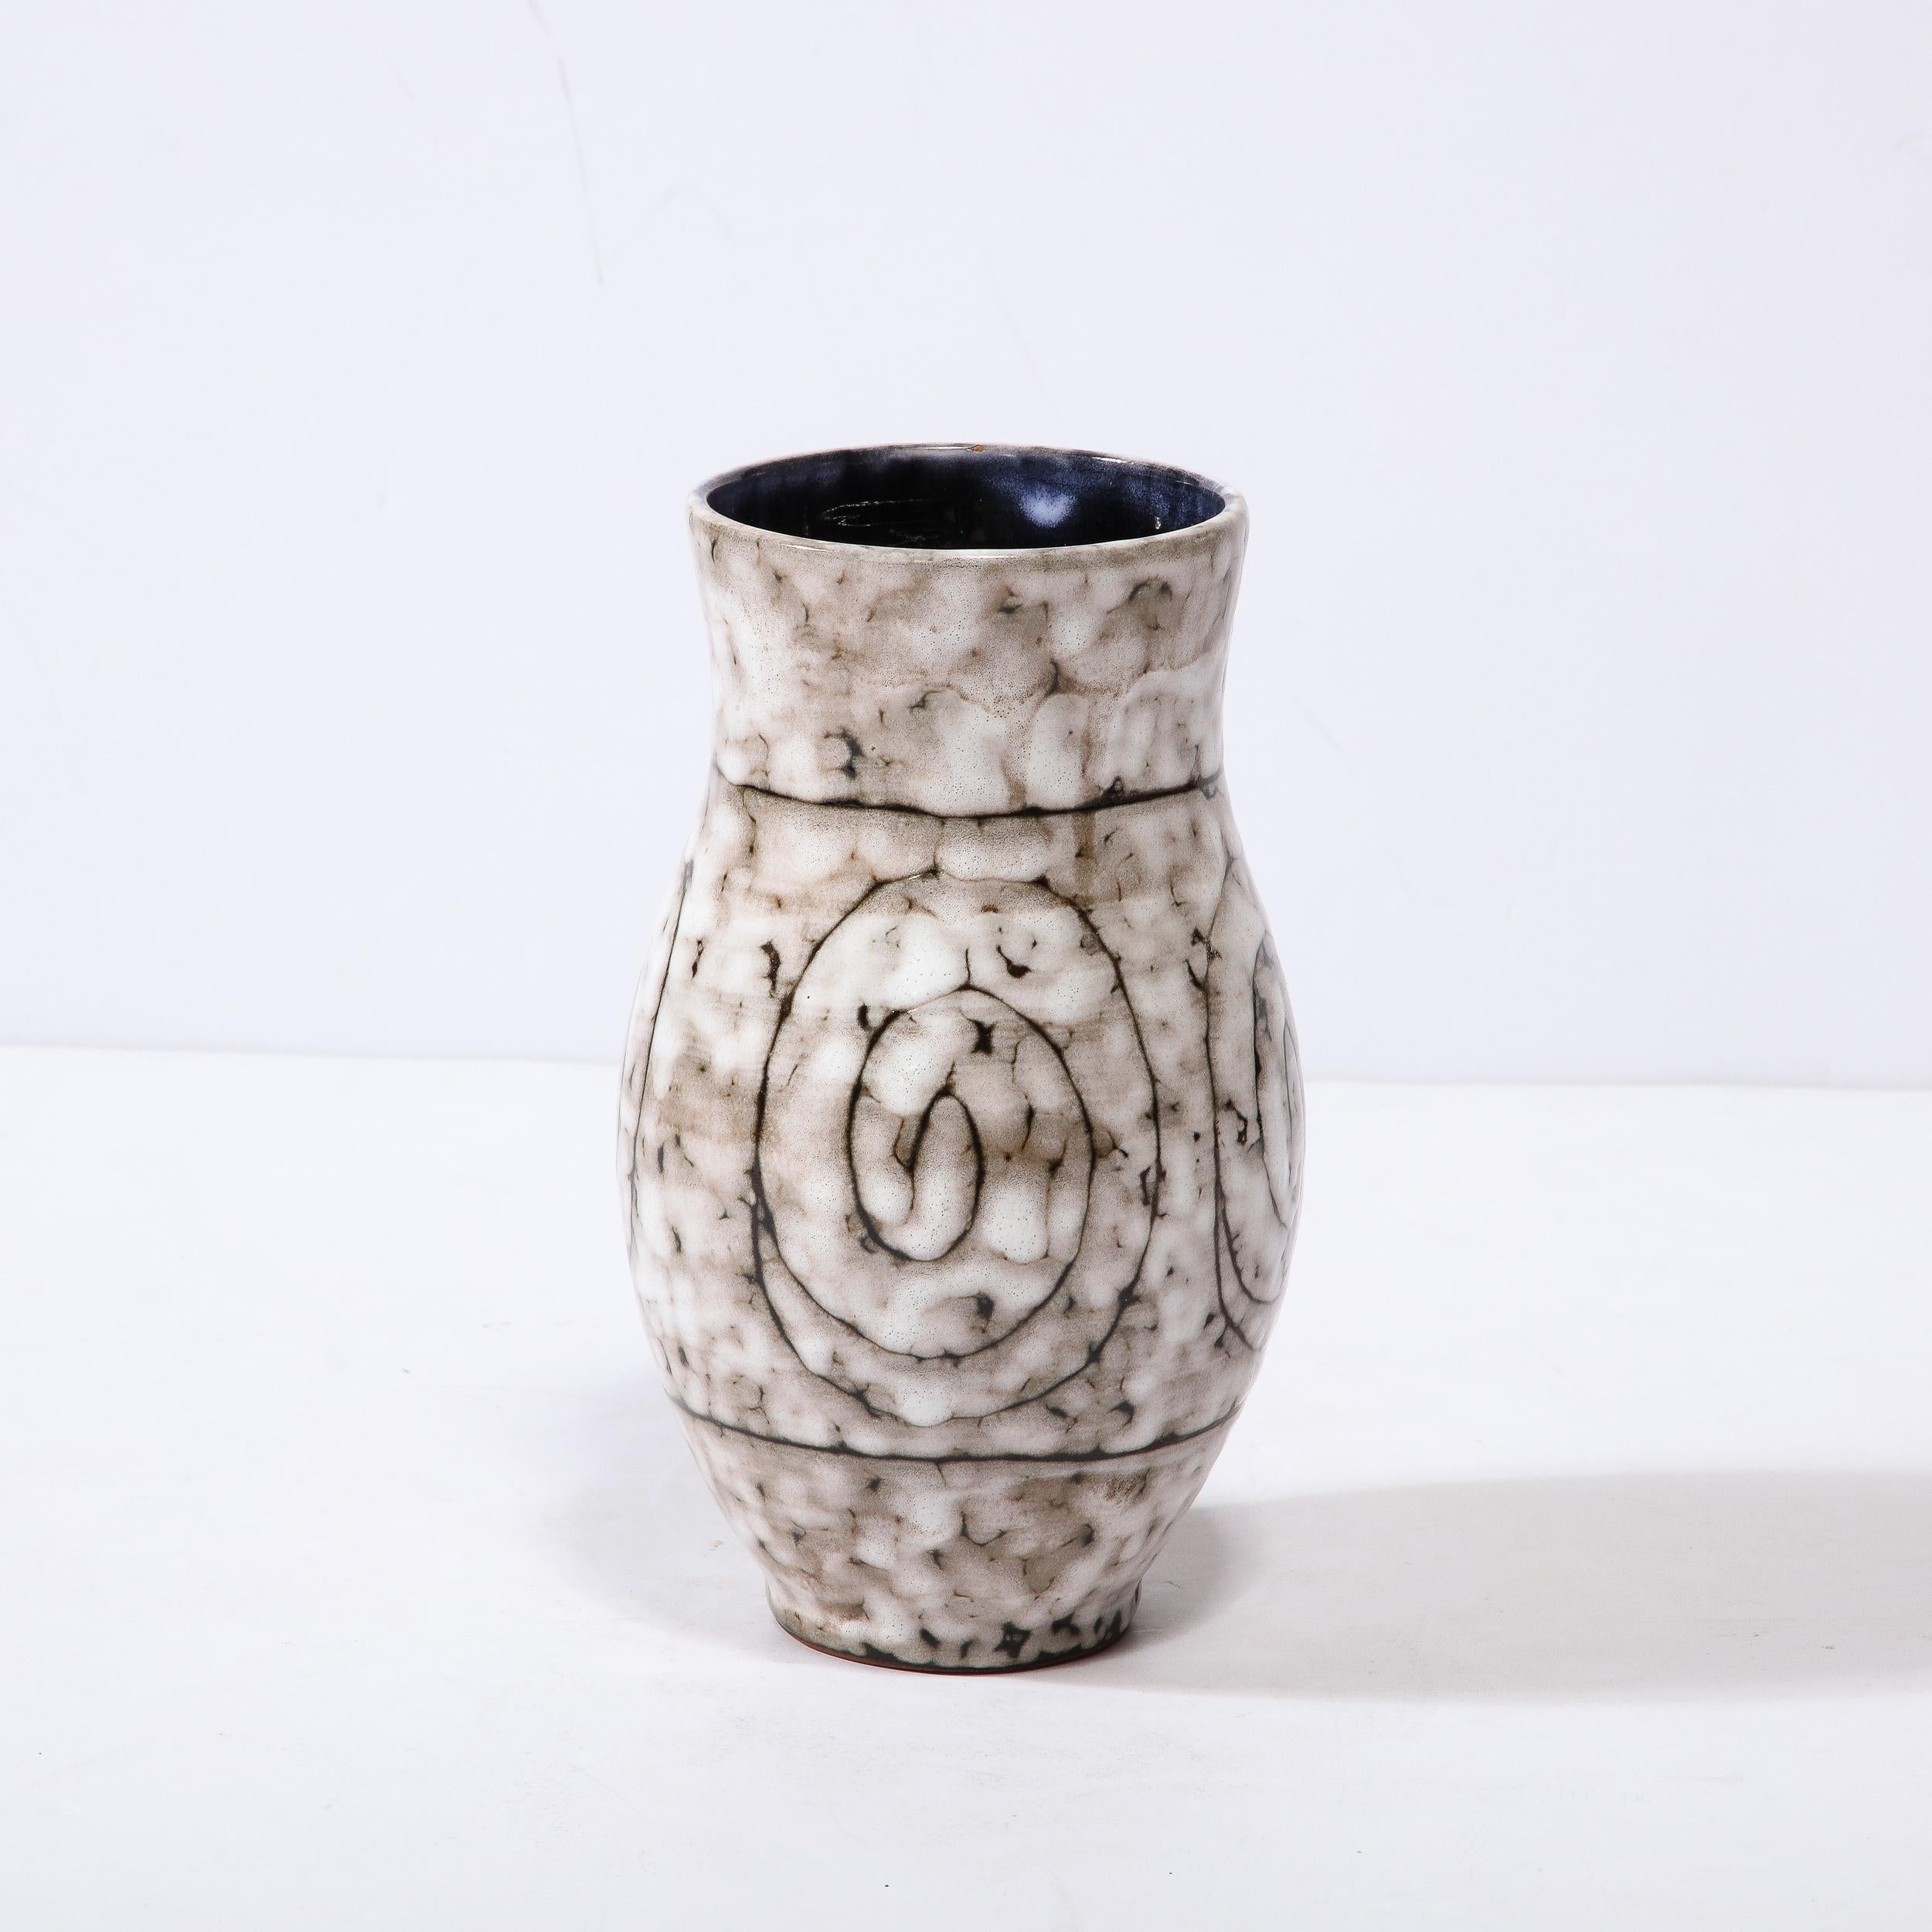 This Mid-Century Modernist Ceramic Vase W/ Coiled Motif is a beautiful example of Post War European Ceramics, realized in Hódmezovasarhely Majolikagyár, Hungary Circa 1960. With a Stunning textural finish composed in Cream White and Blackened Umber,